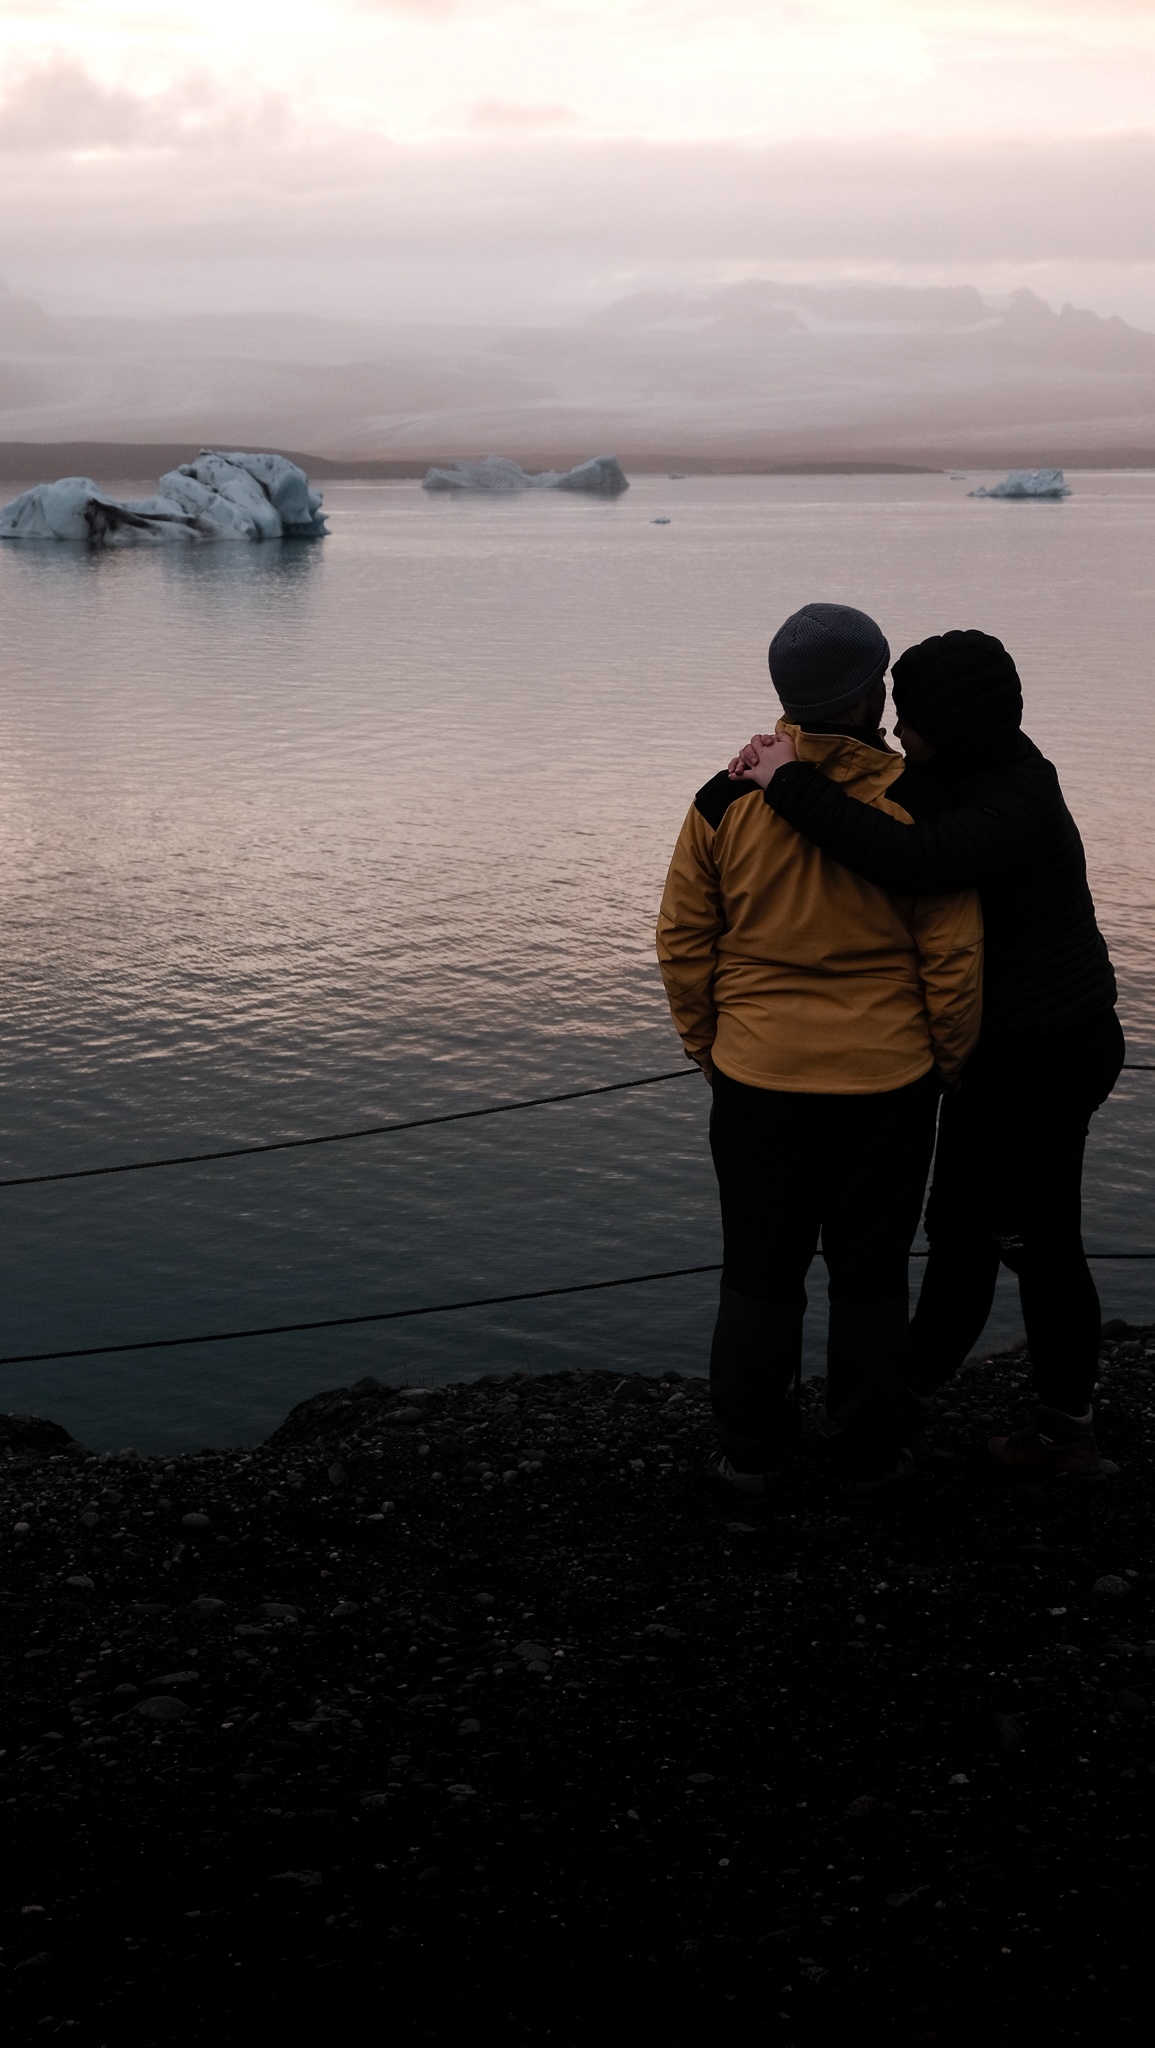 A women leans endearingly against her partner as they look out over the glaciel lake after sunset